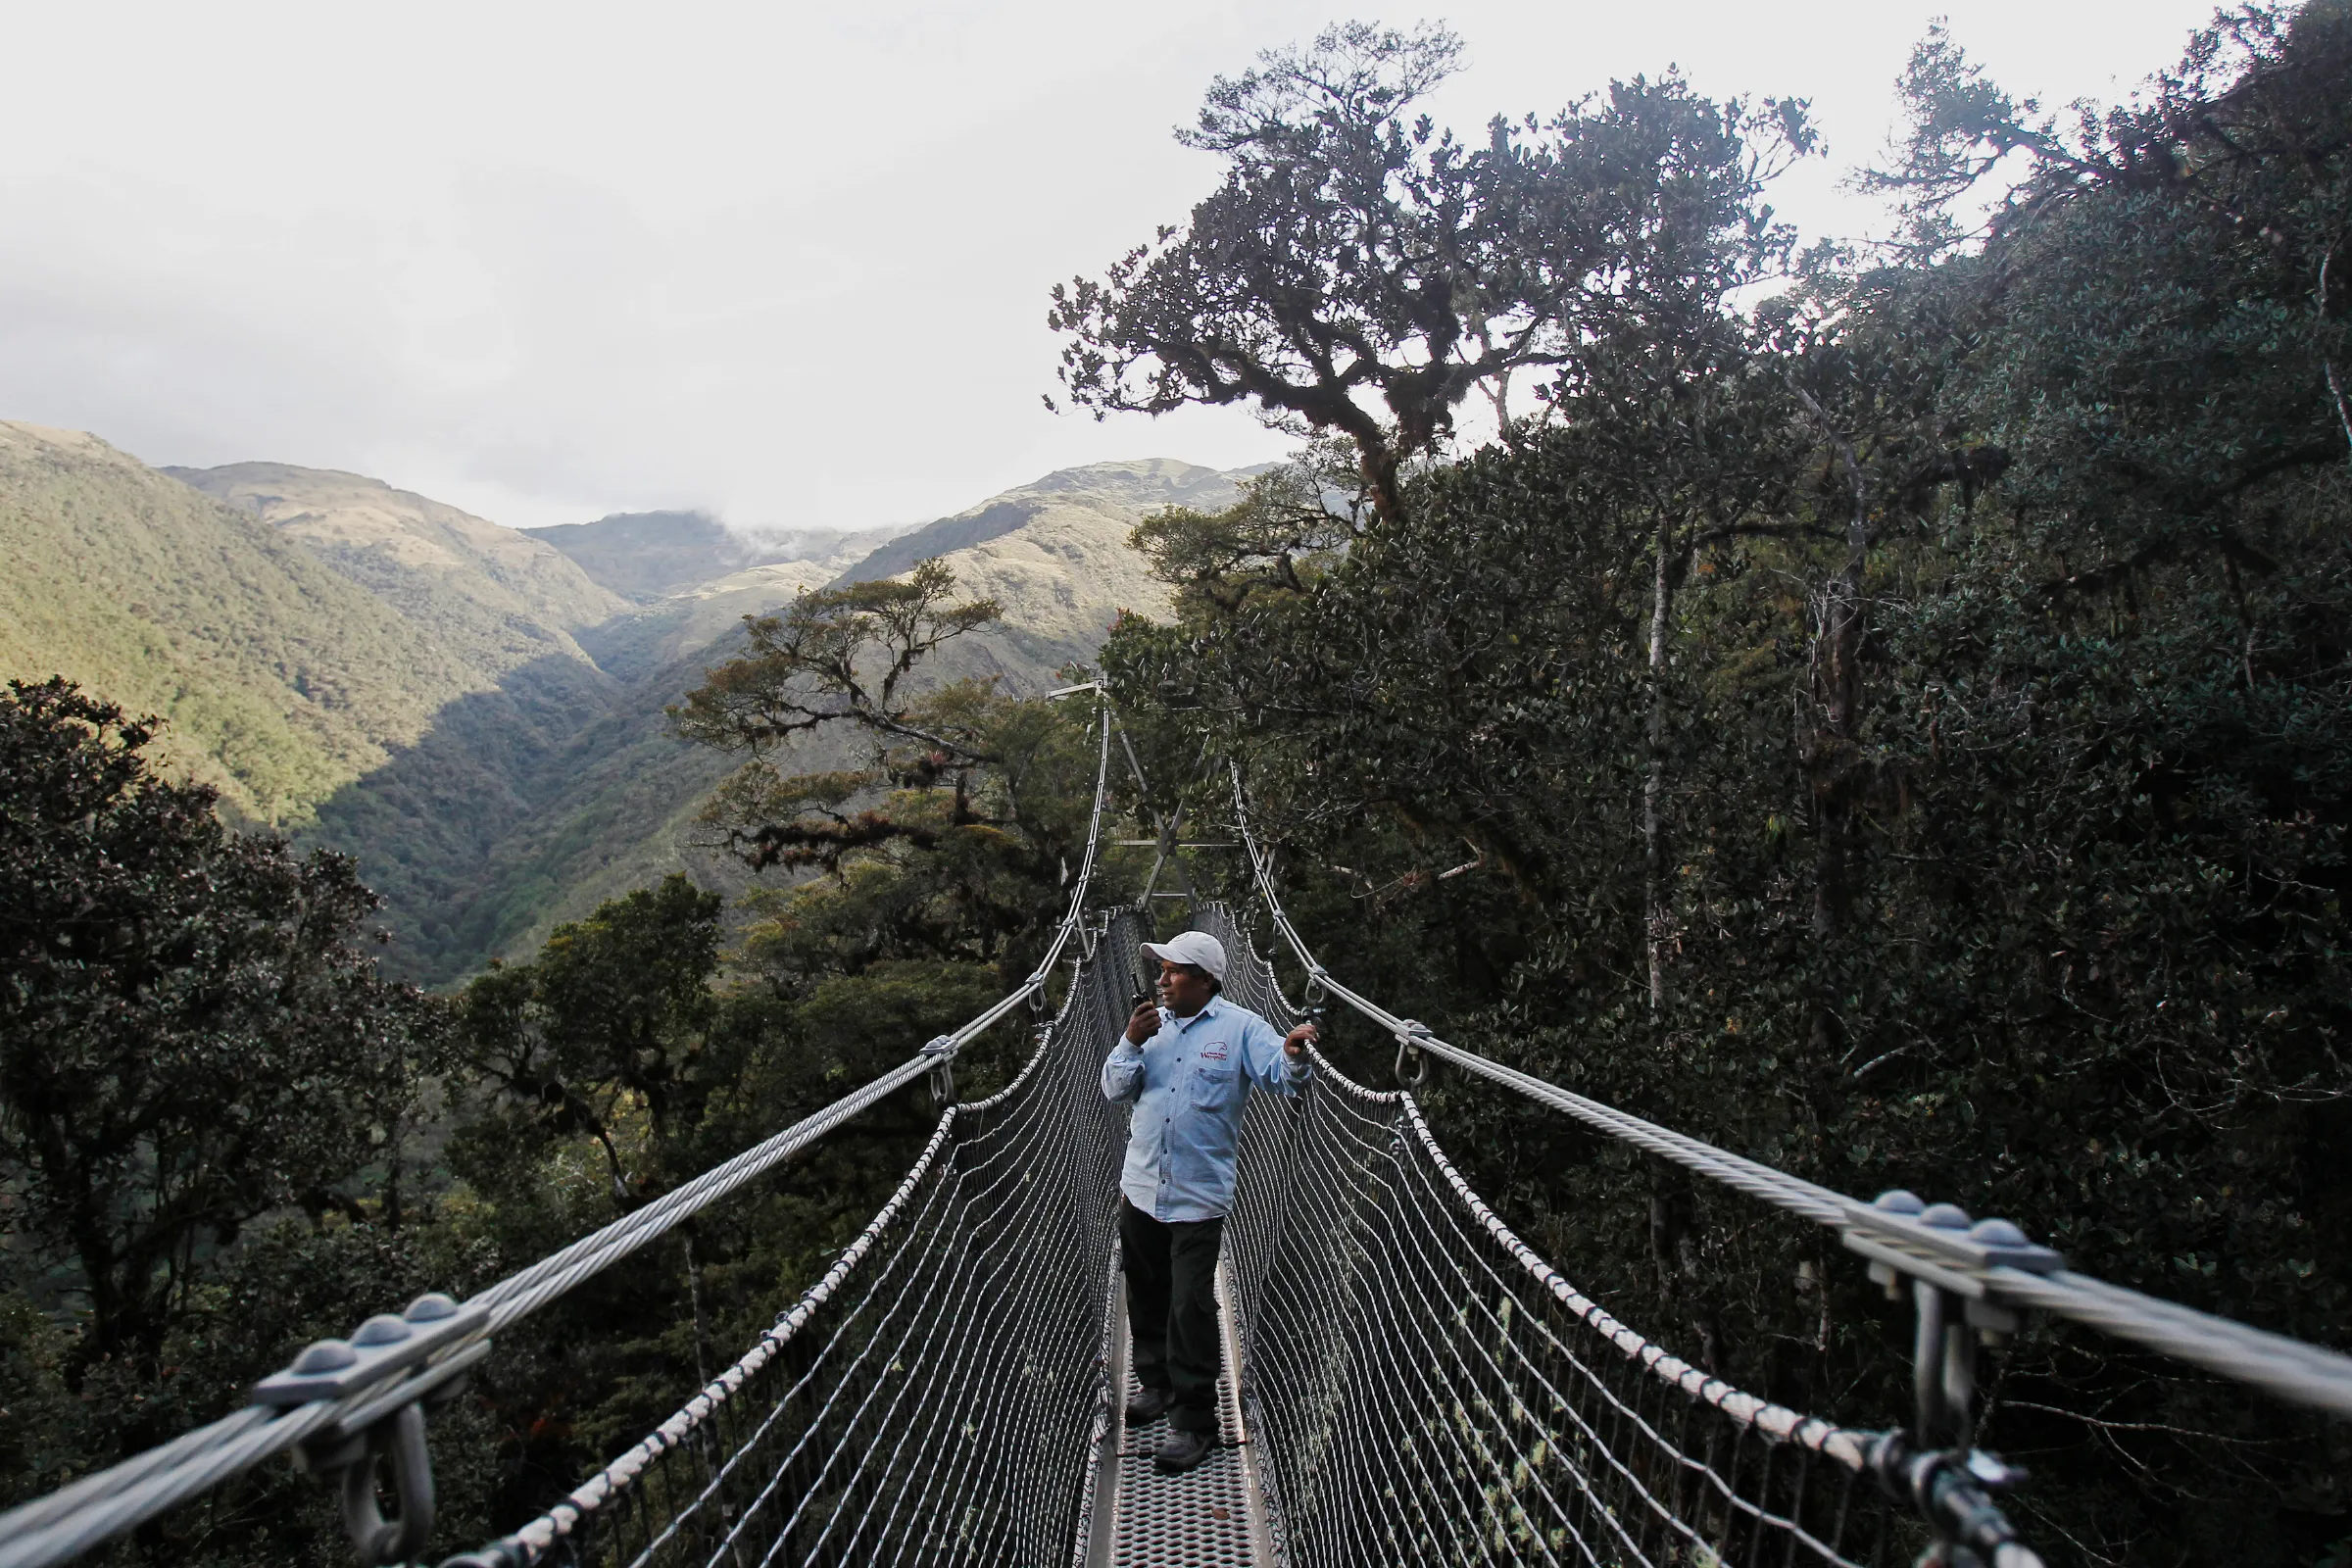 A man looks out at the cloud forest standing atop a canopy at the buffer zone of Manu National Park in front of Huayquecha Biological Station near Paucartambo, Cusco December 5, 2014